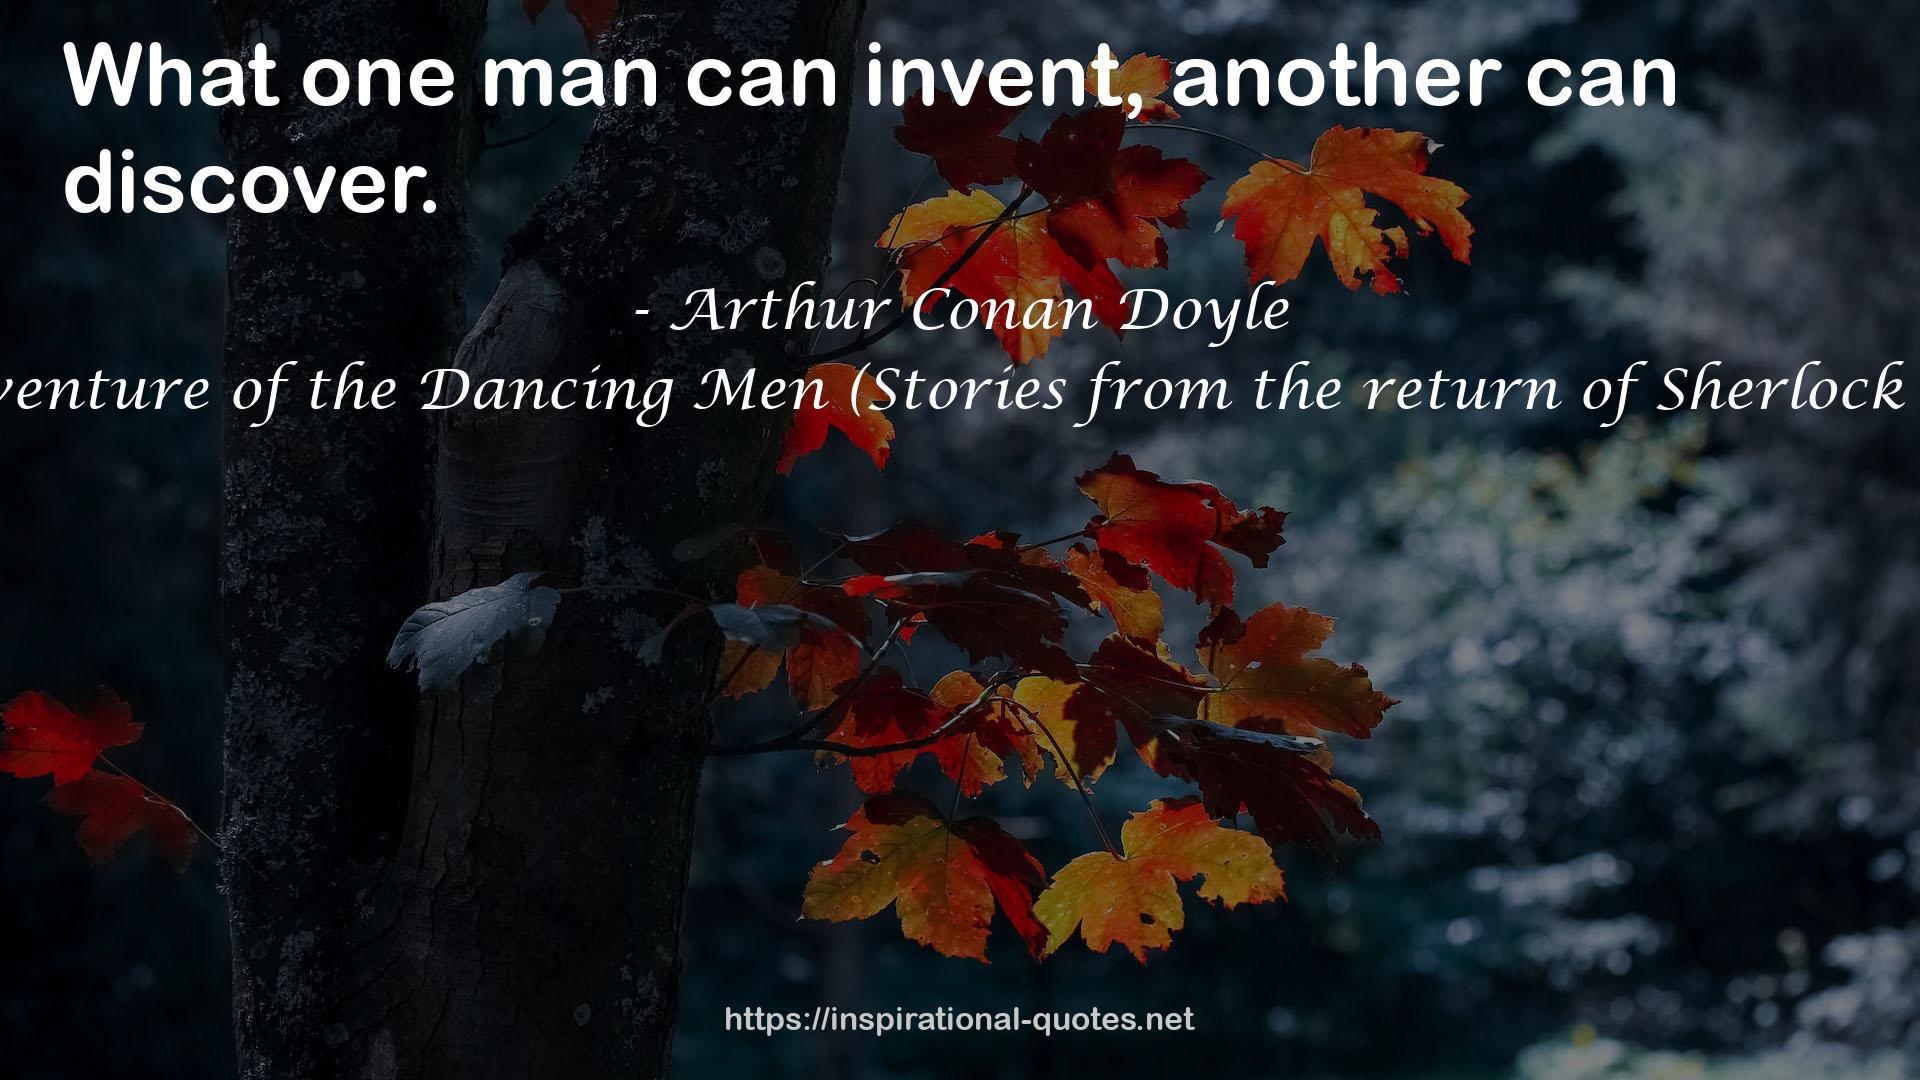 The Adventure of the Dancing Men (Stories from the return of Sherlock Holmes) QUOTES